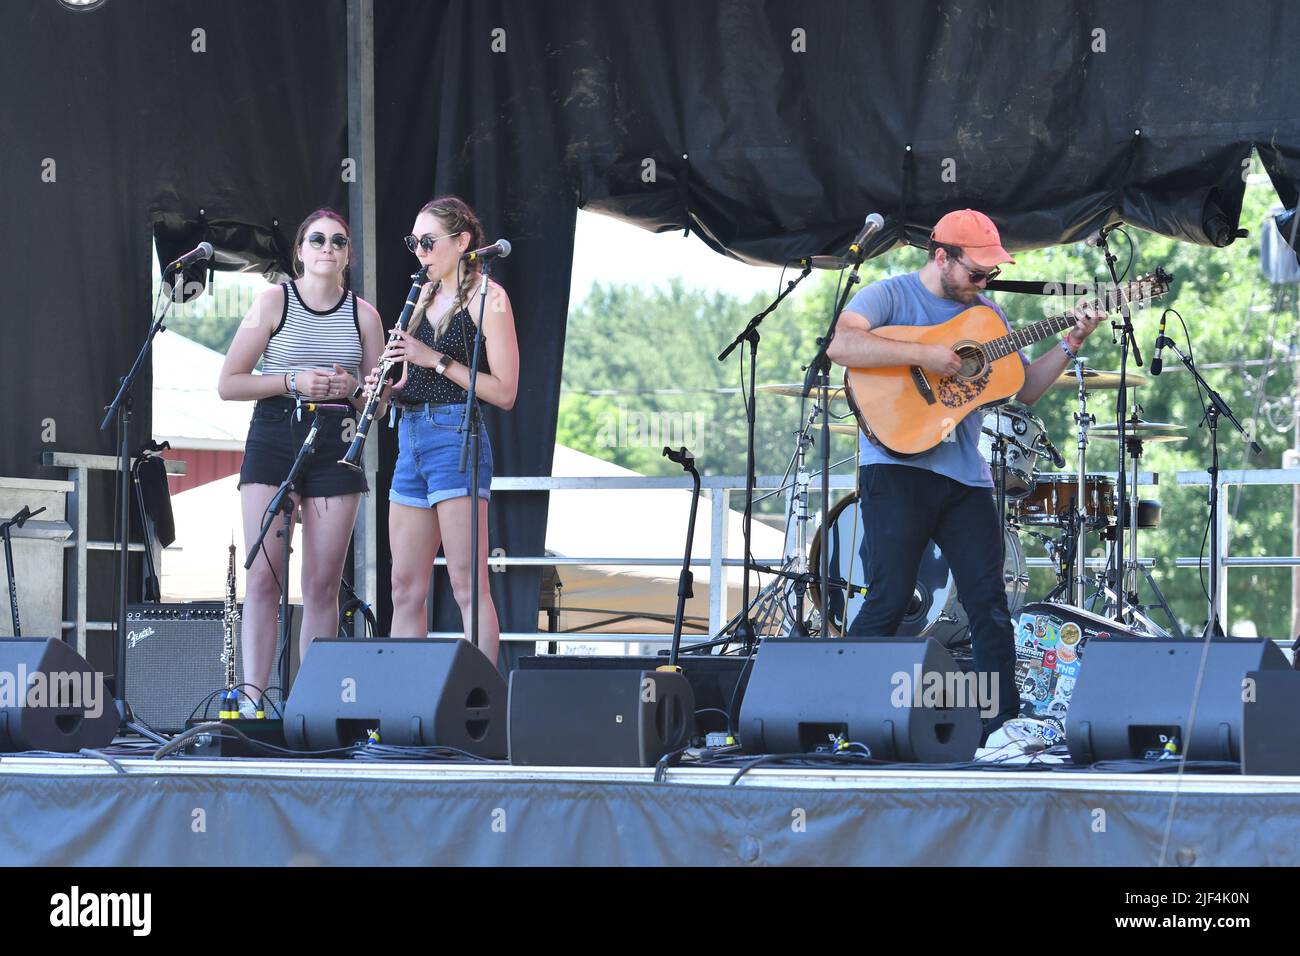 Musician Matthew Fowler is shown performing on stage during a “live” concert appearance at the Green River Festival. Stock Photo